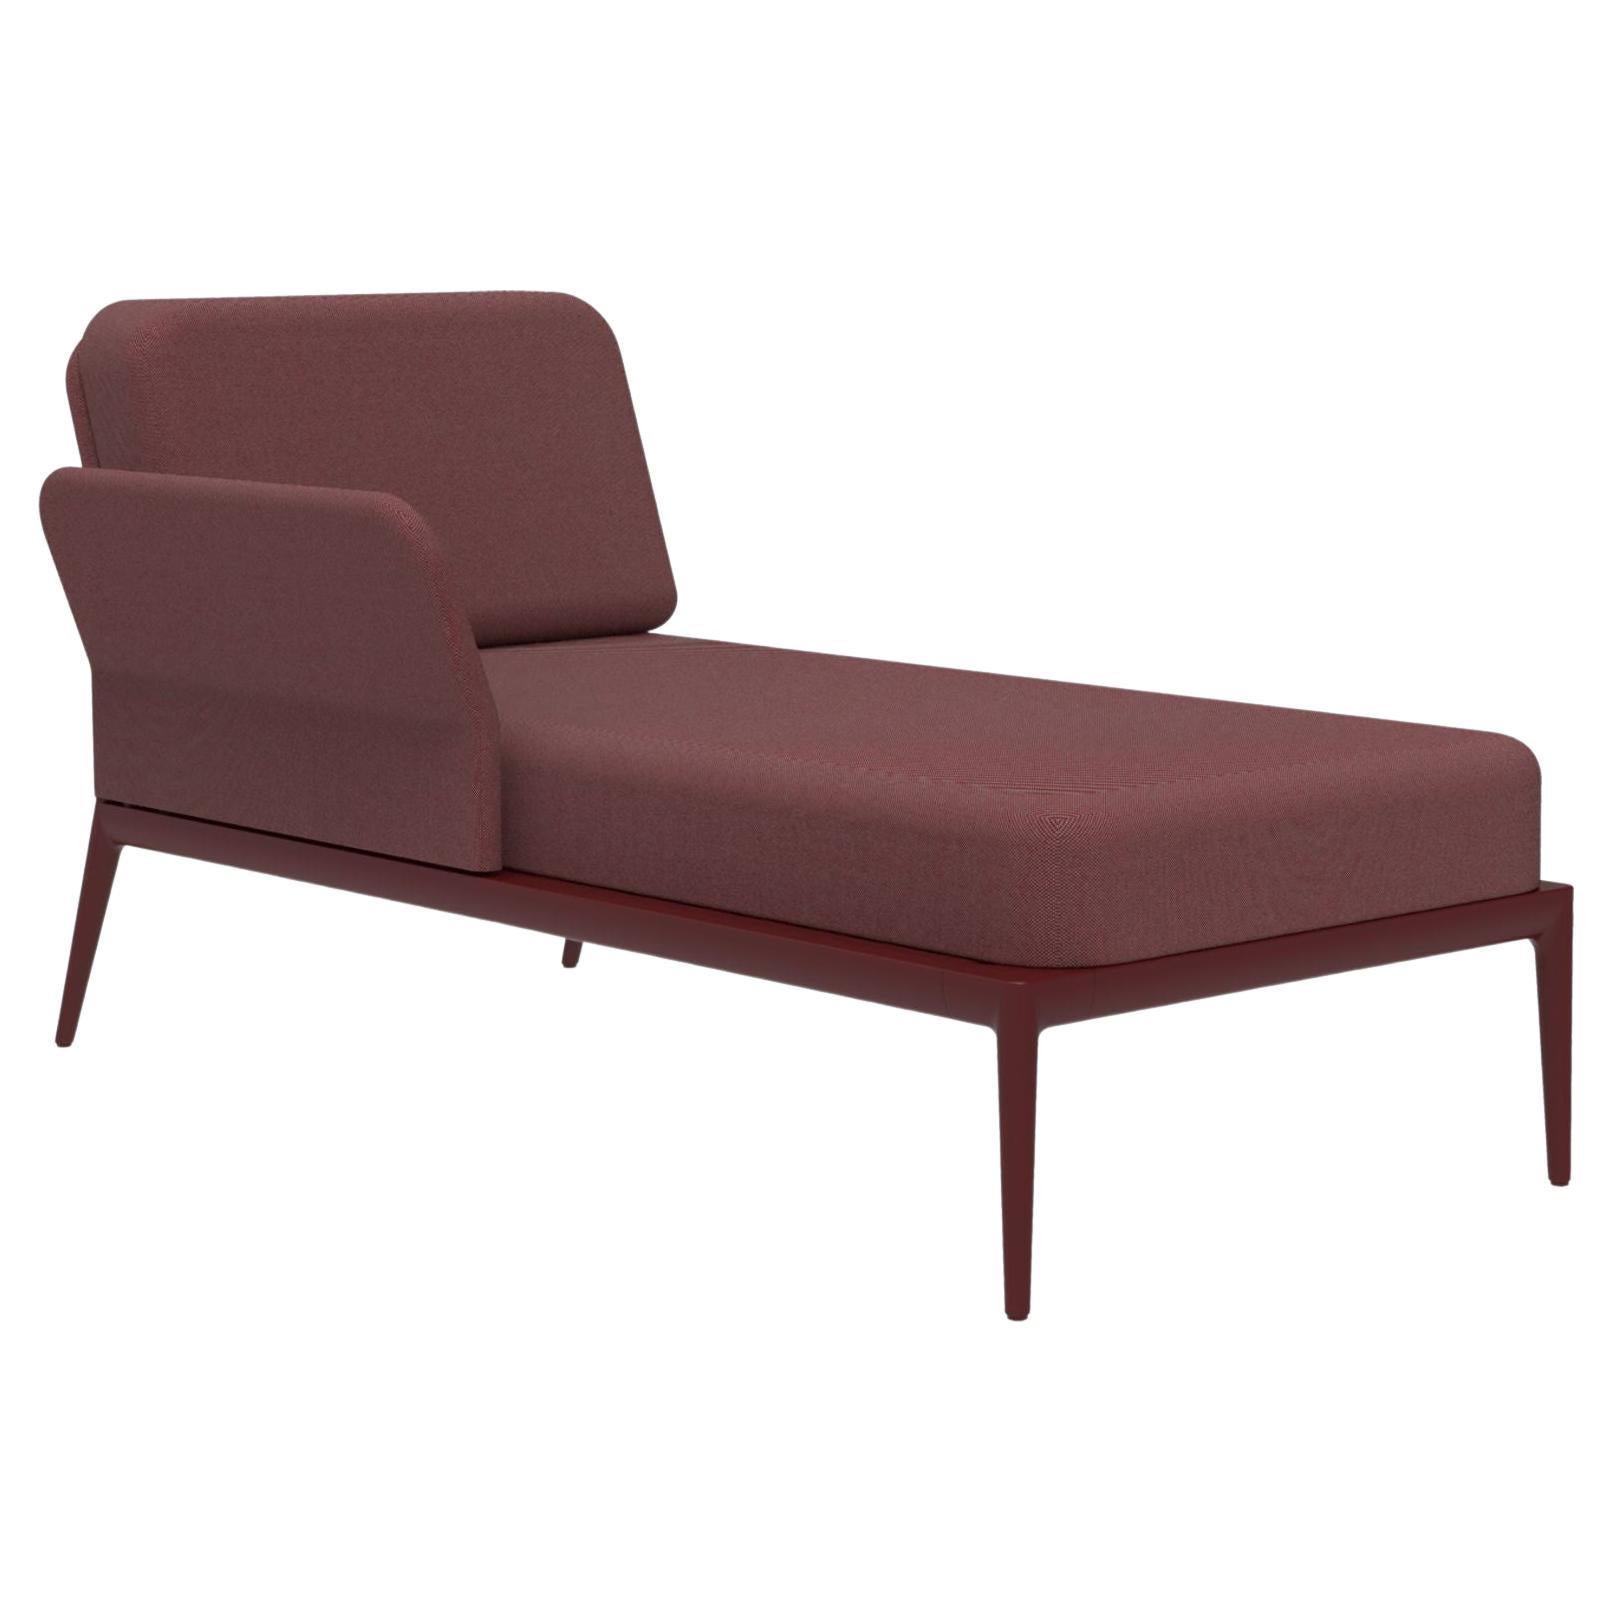 Cover Burgundy Right Chaise Lounge by Mowee For Sale